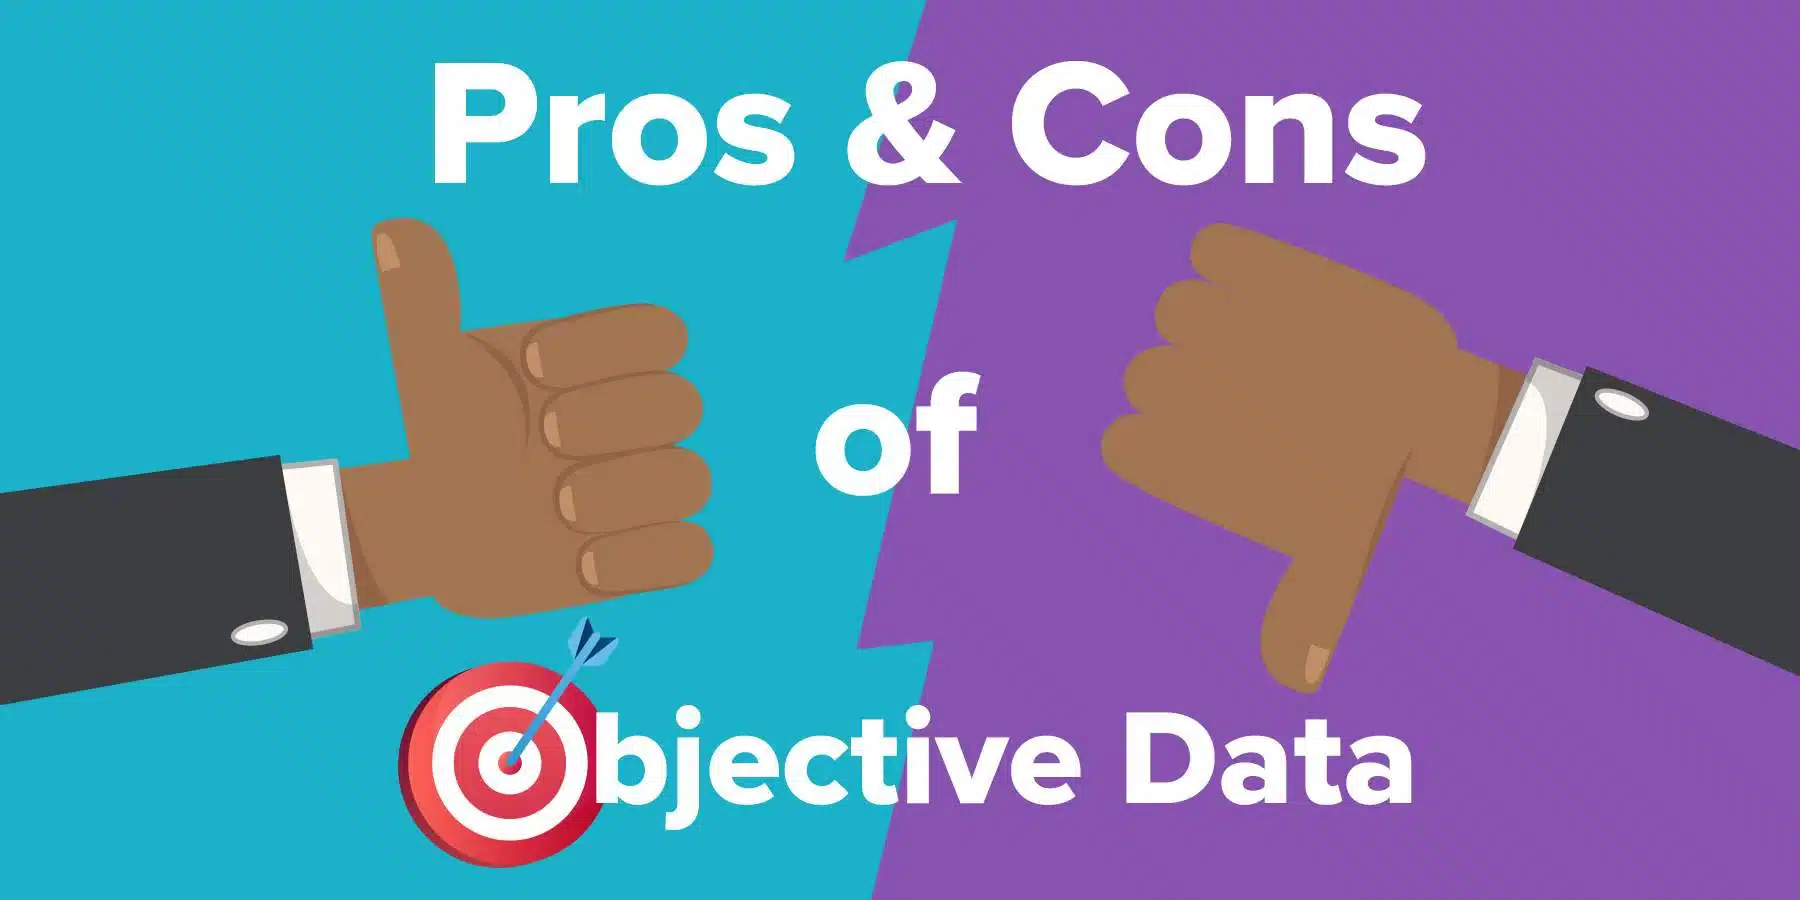 Pro's and Con's Objective Graphic